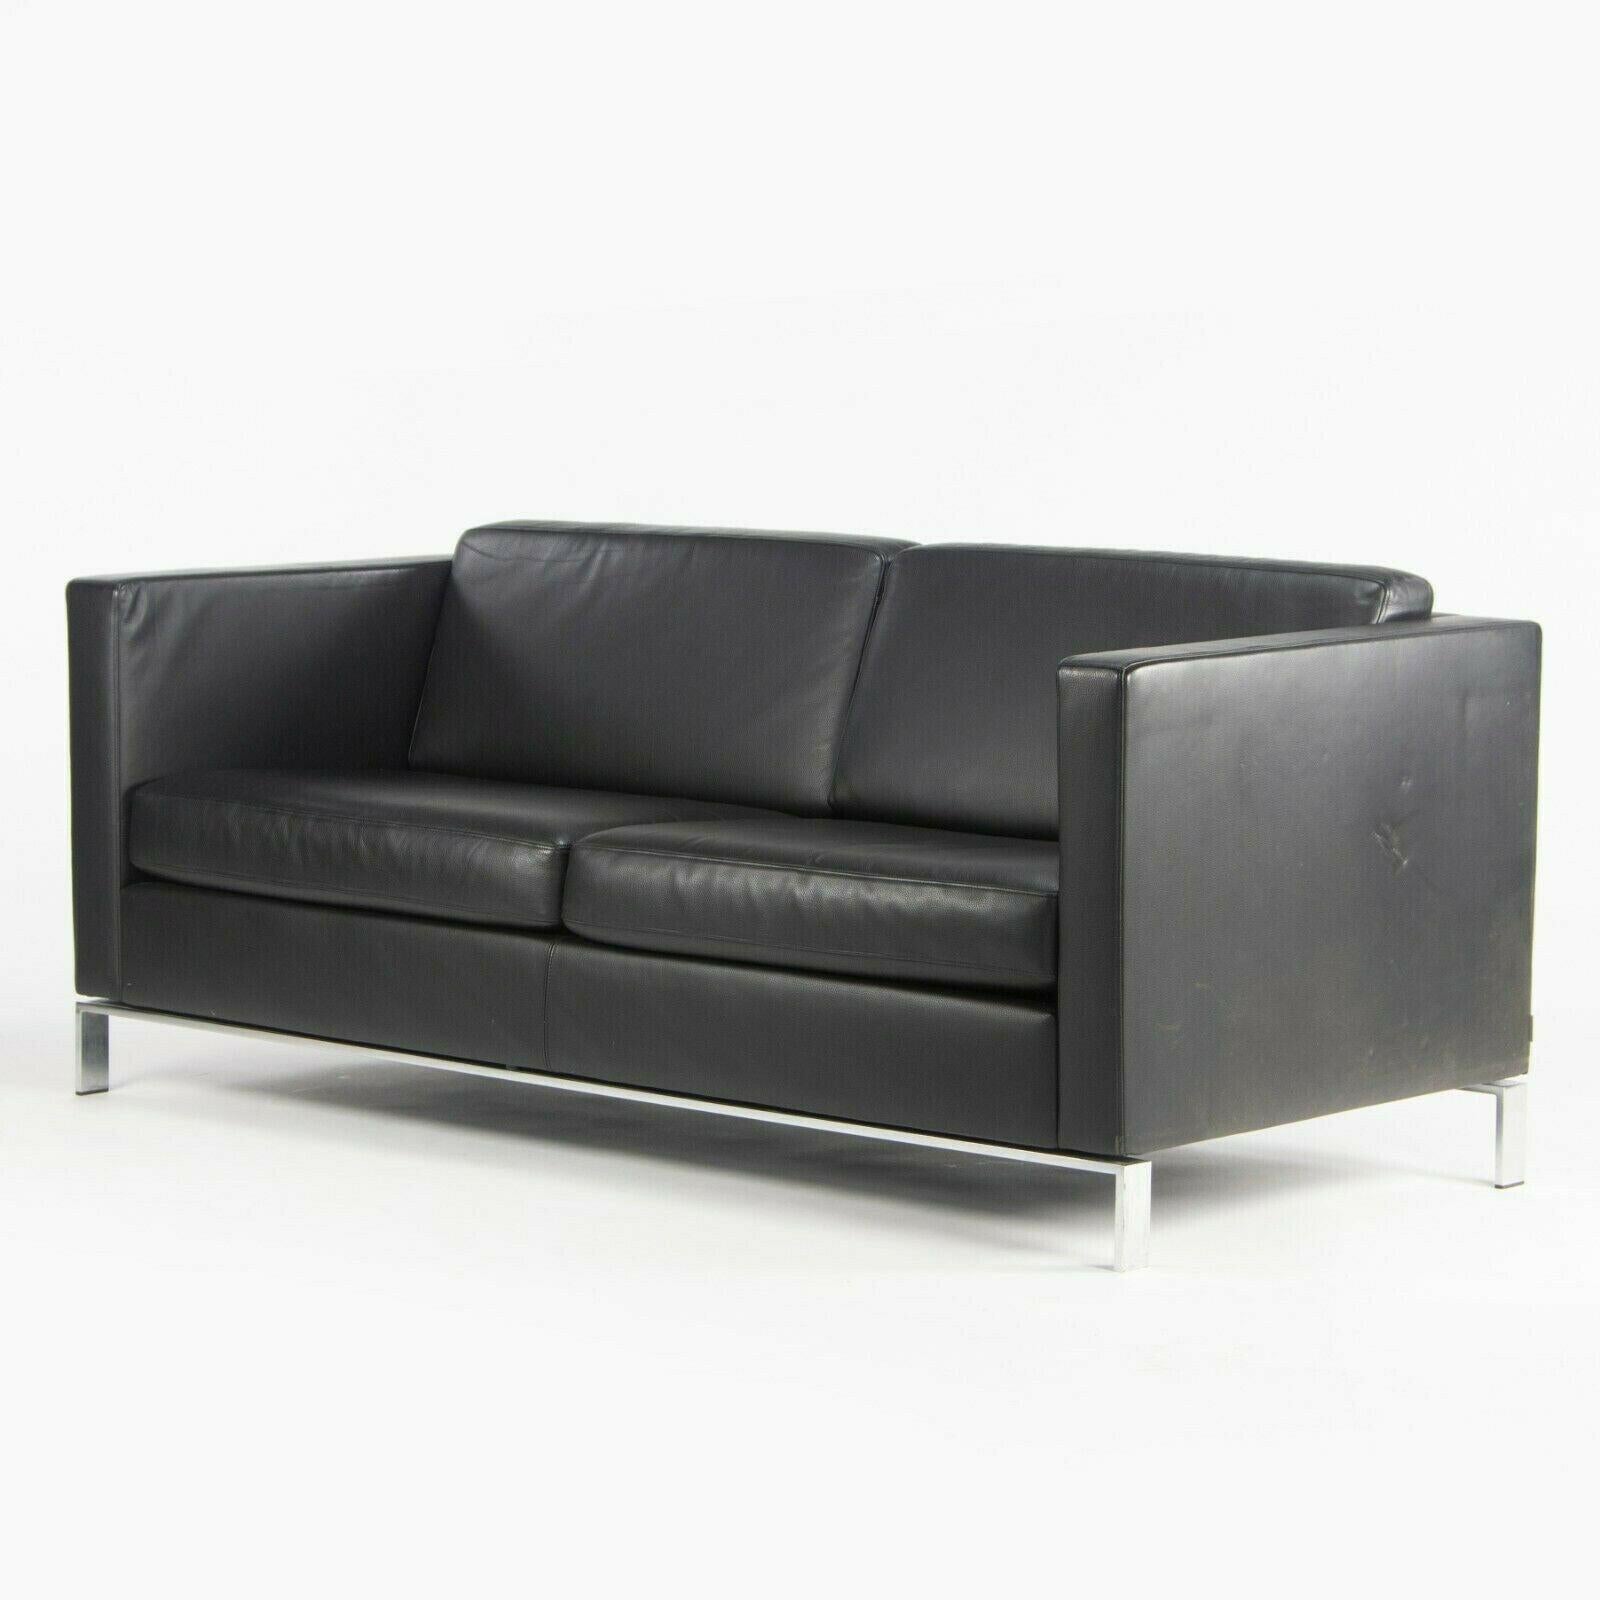 Lord Norman Foster Model 500 Black Leather 2 Seat Settee Sofa for Walter Knoll In Good Condition For Sale In Philadelphia, PA